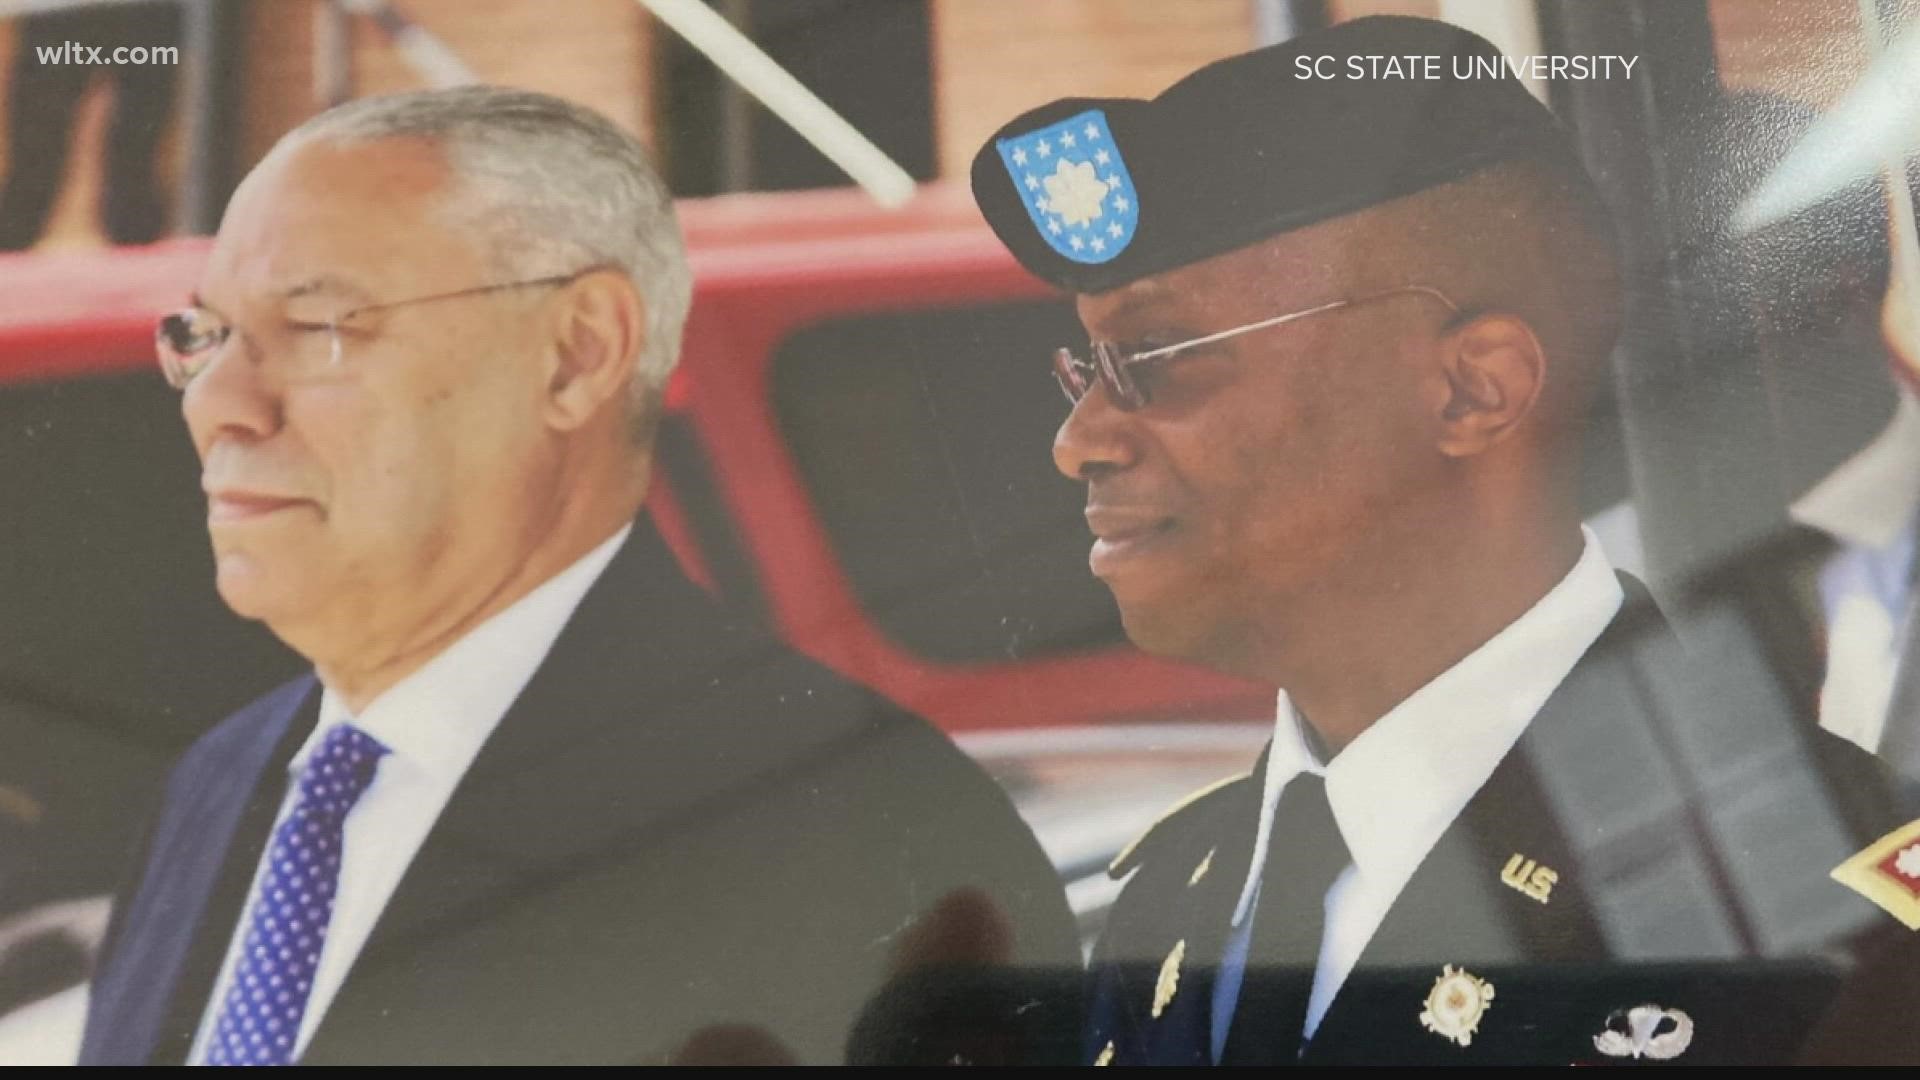 Colin Powell is being remembered at South Carolina State University.